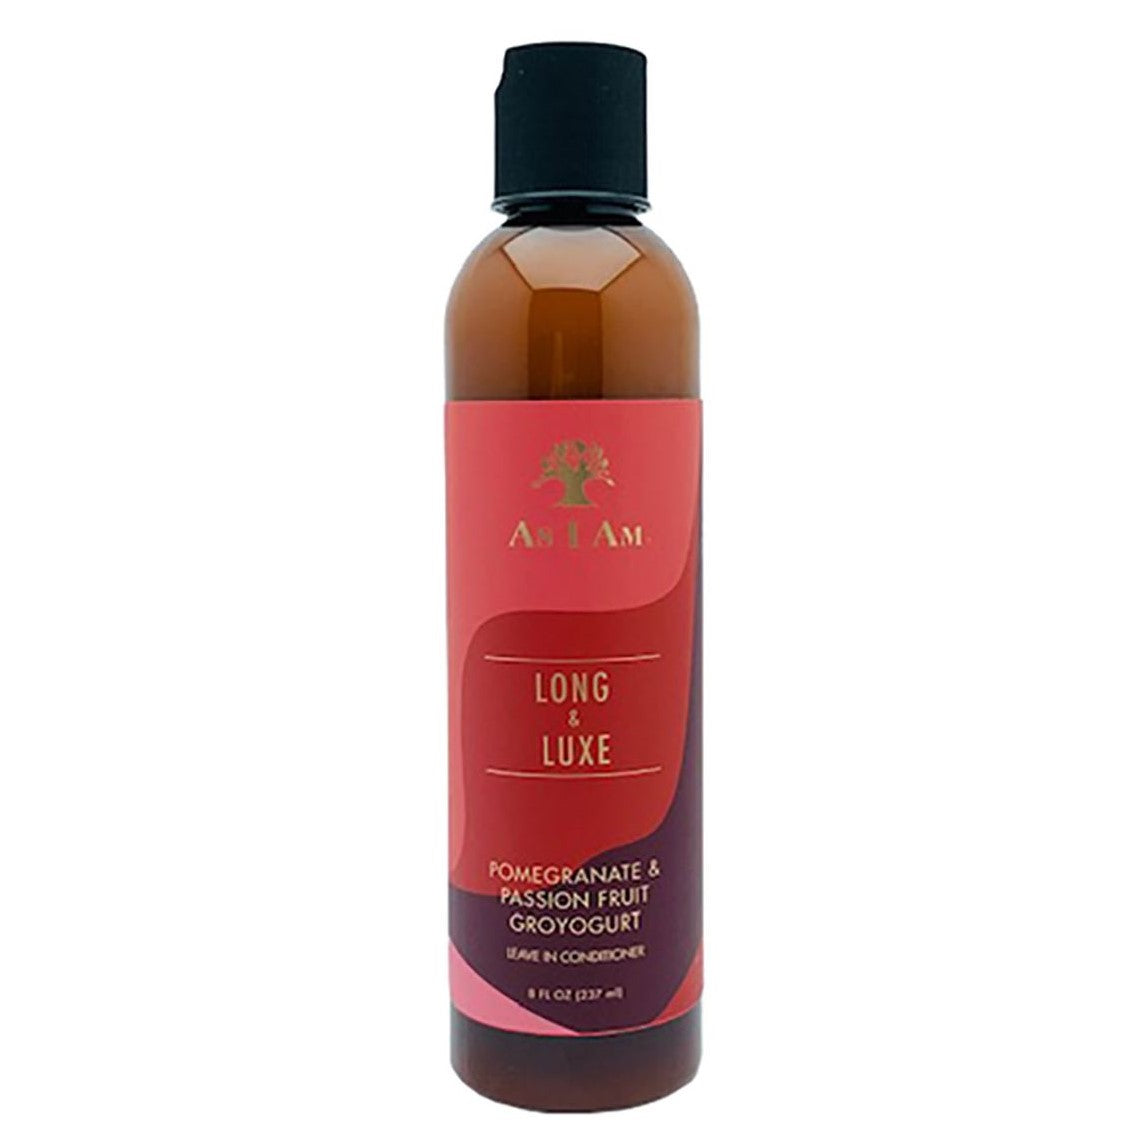 As I Am Long & Luxe GroYogurt Leave in Conditioner 237ml 